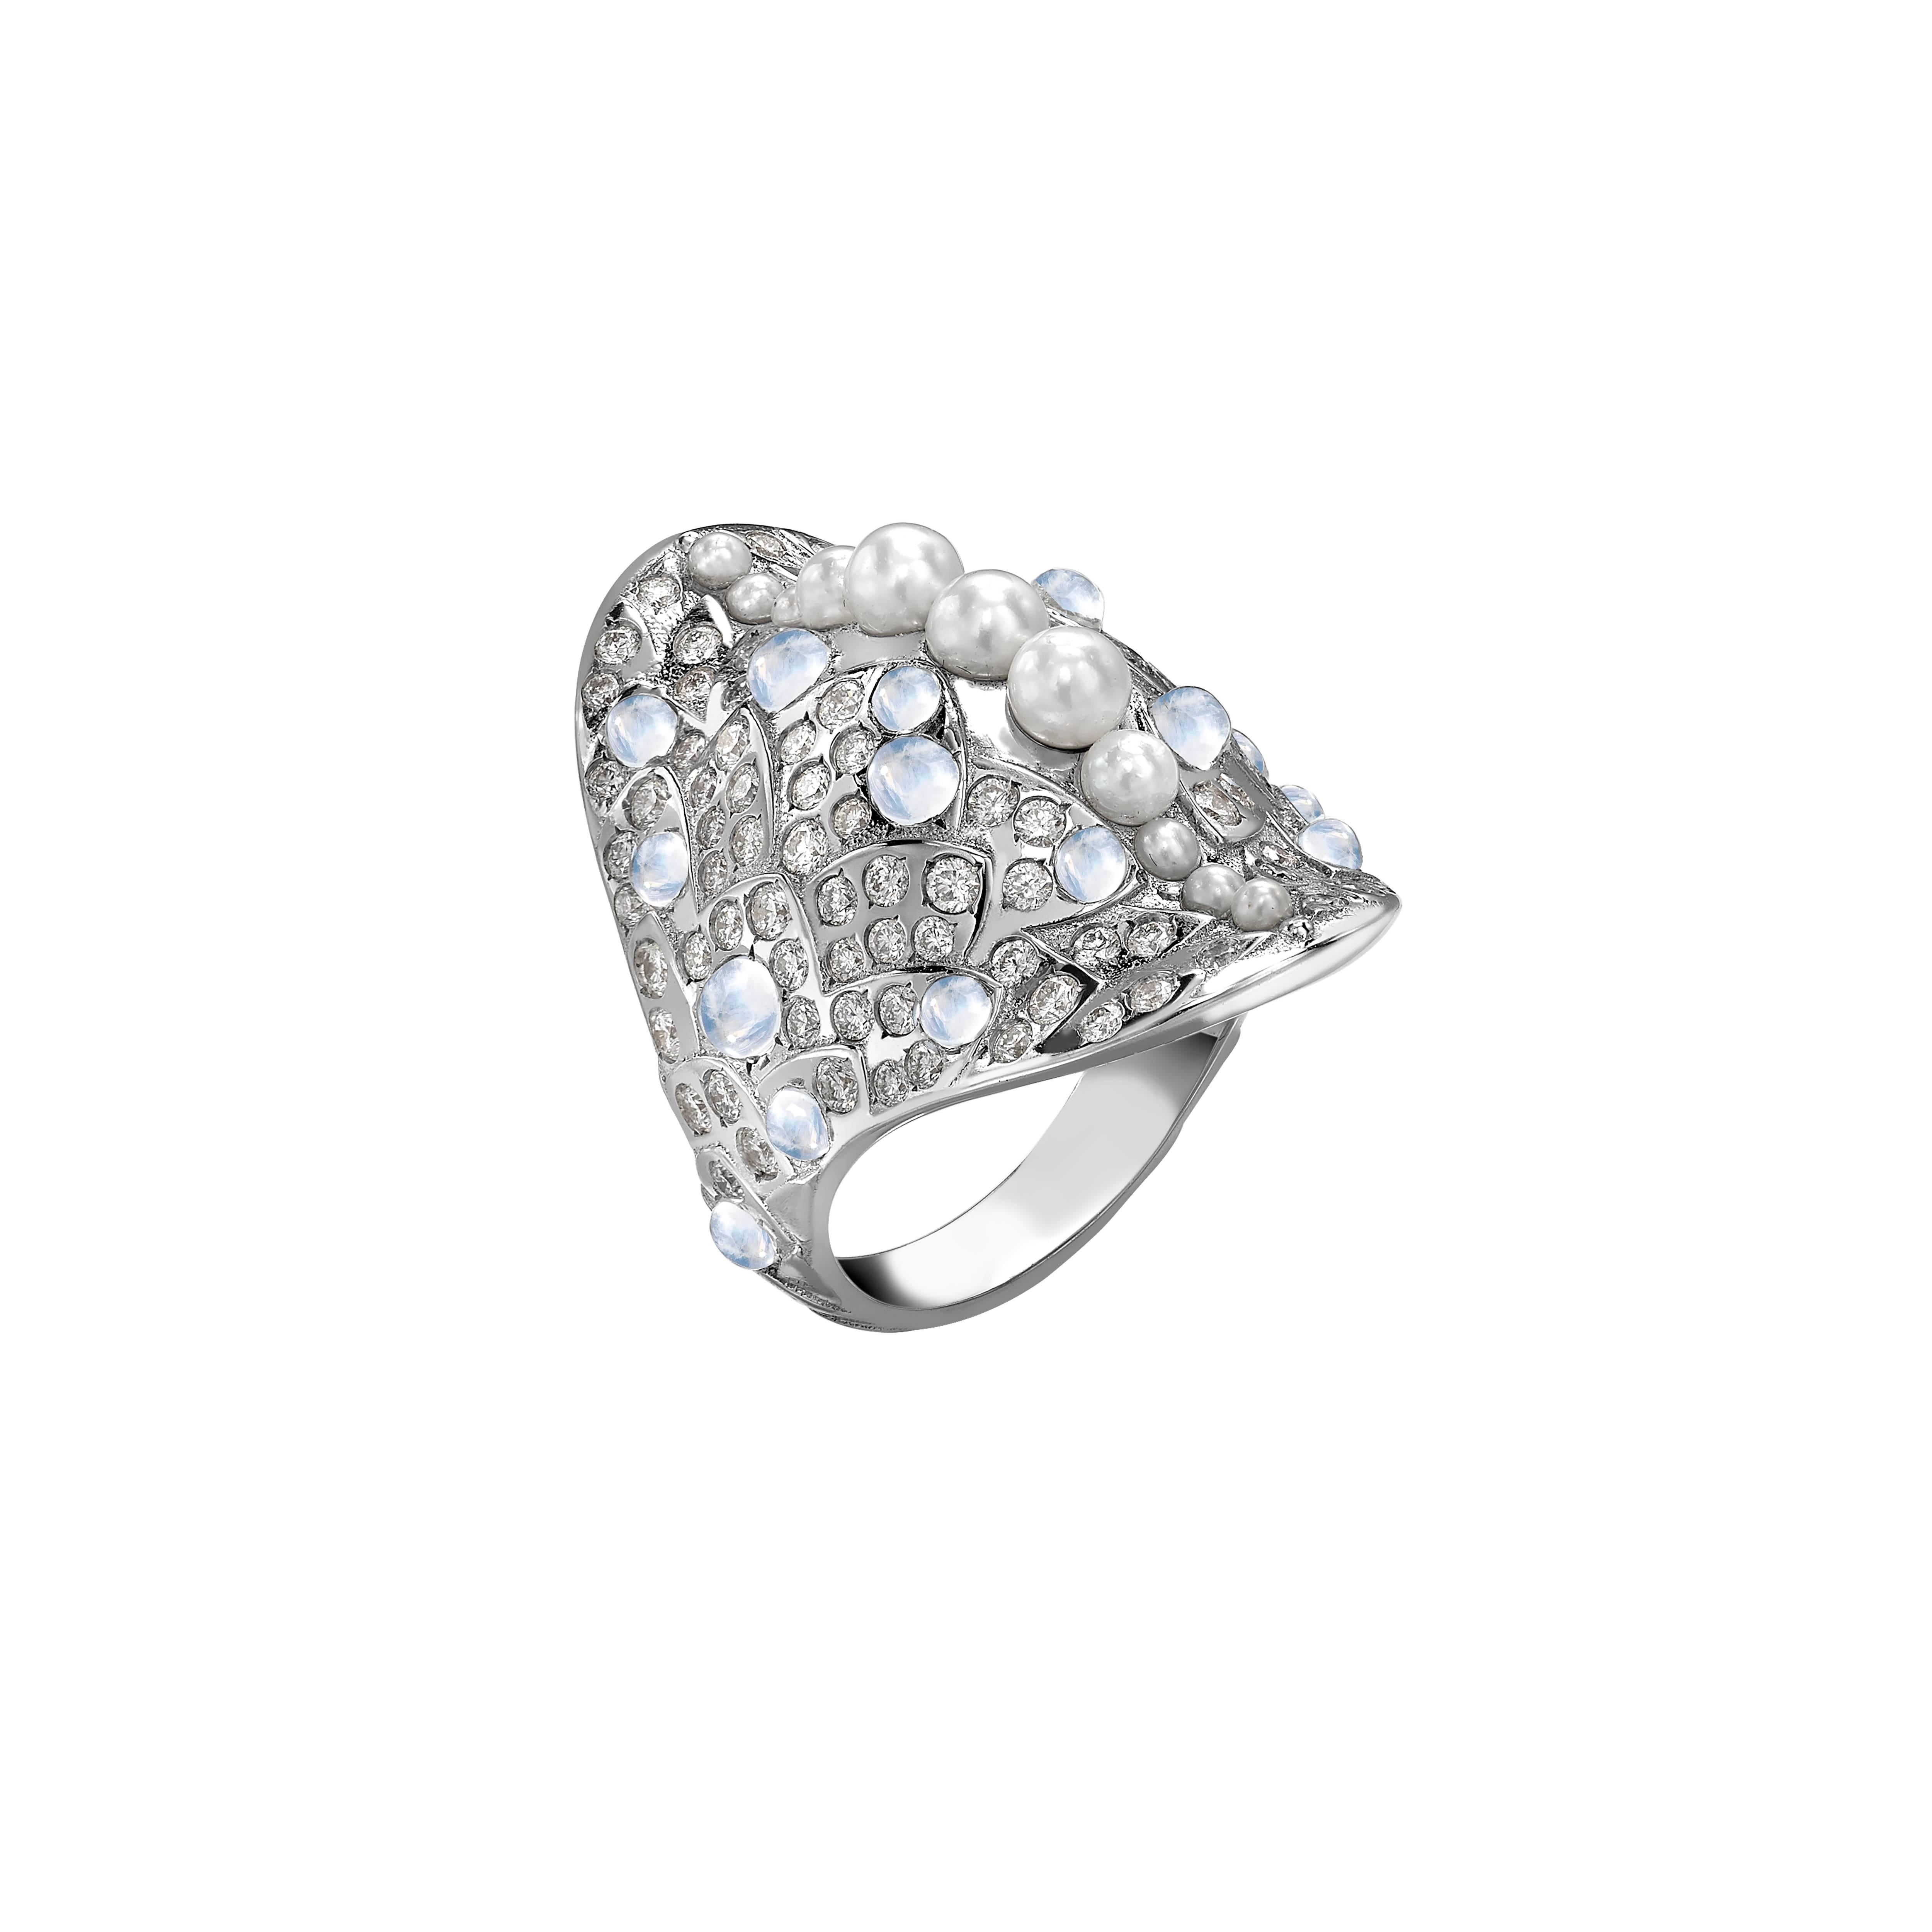 Ring sizes 50, 54 and 55 available.
(Alternative sizes available on a made to order basis, with an estimated delivery time of 4-6 weeks)

18k White Gold approx. 13gr, 116 Diamonds 1.33ct, 20 Moonstones 2.40ct and 9 Akoya Keshi Pearls

Brightly